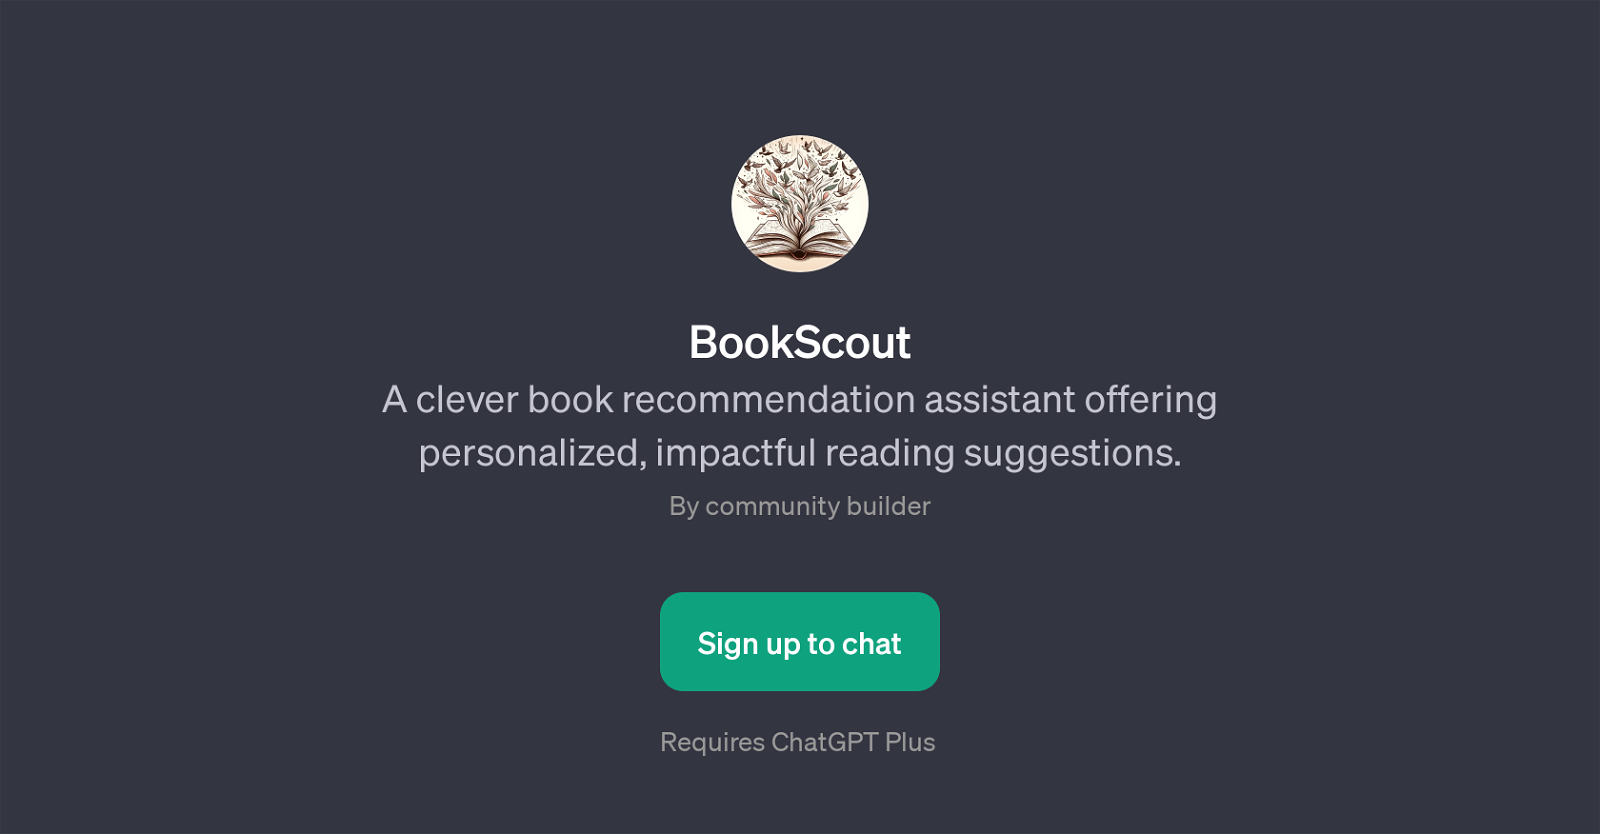 BookScout website